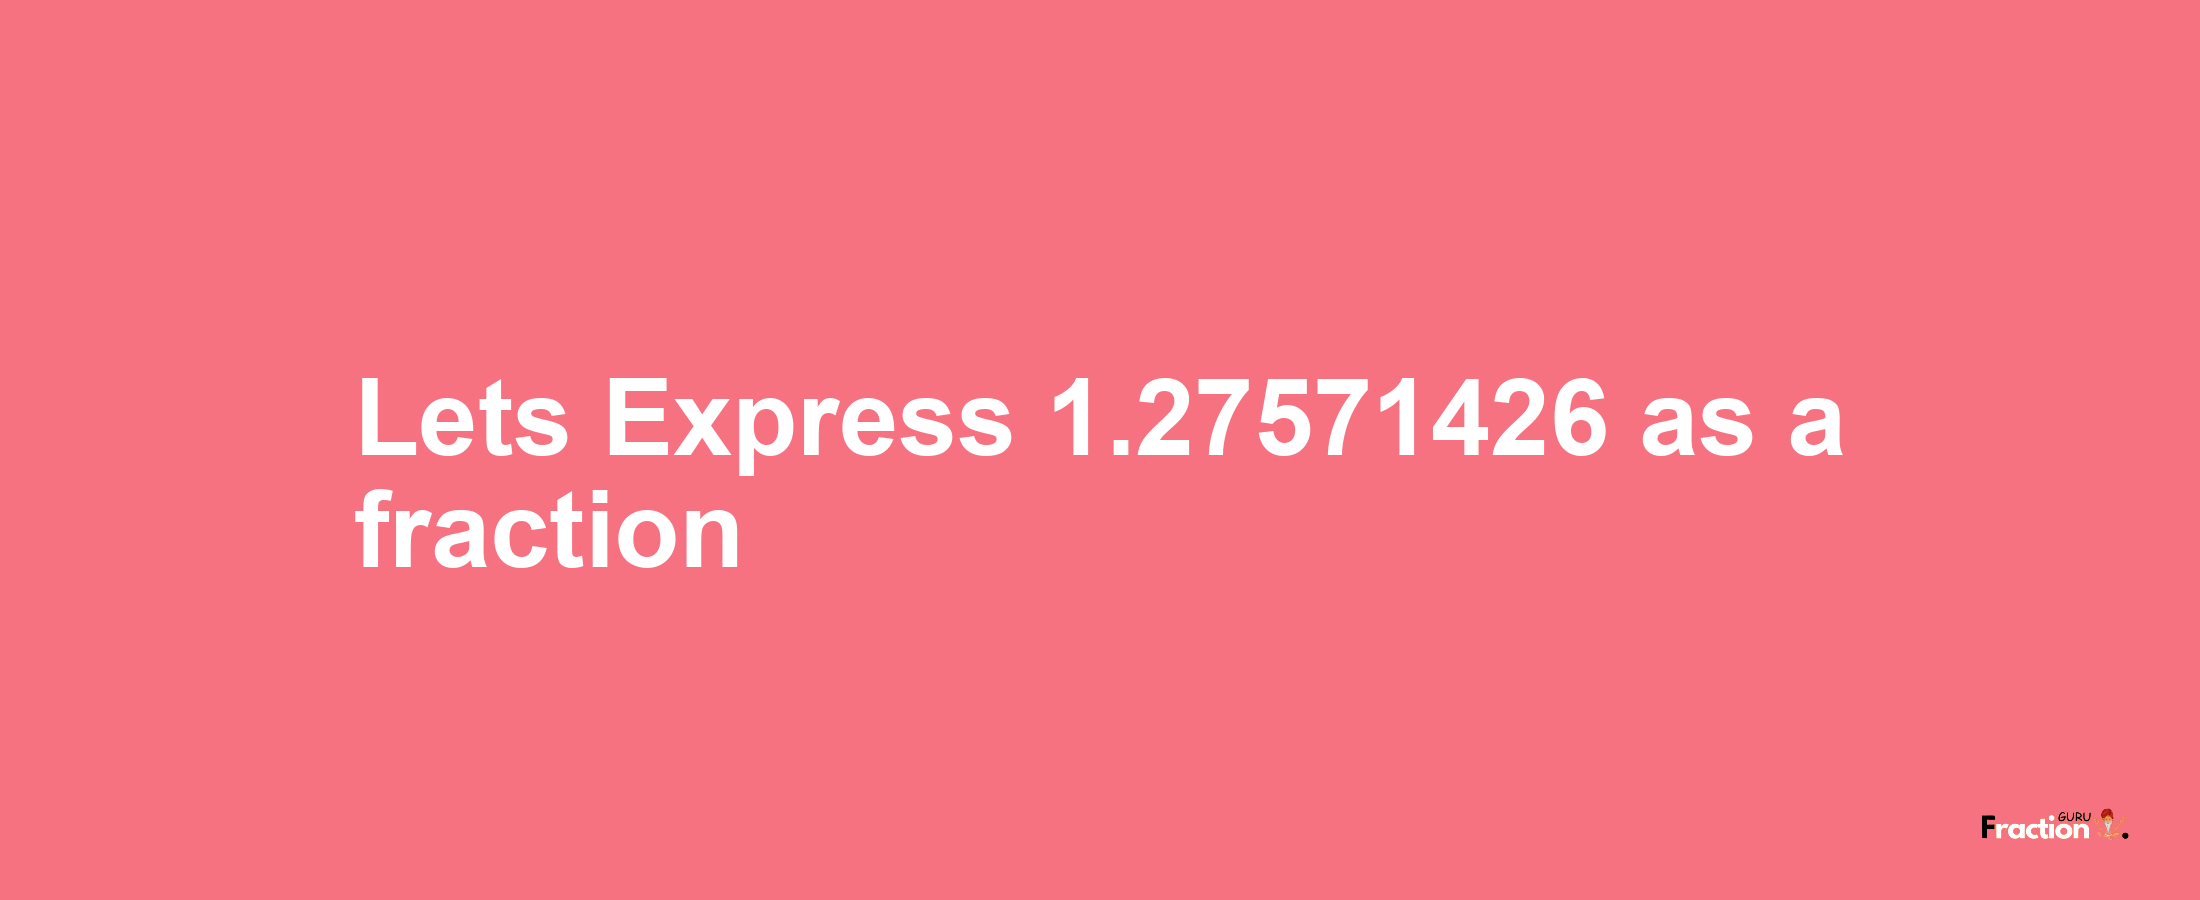 Lets Express 1.27571426 as afraction